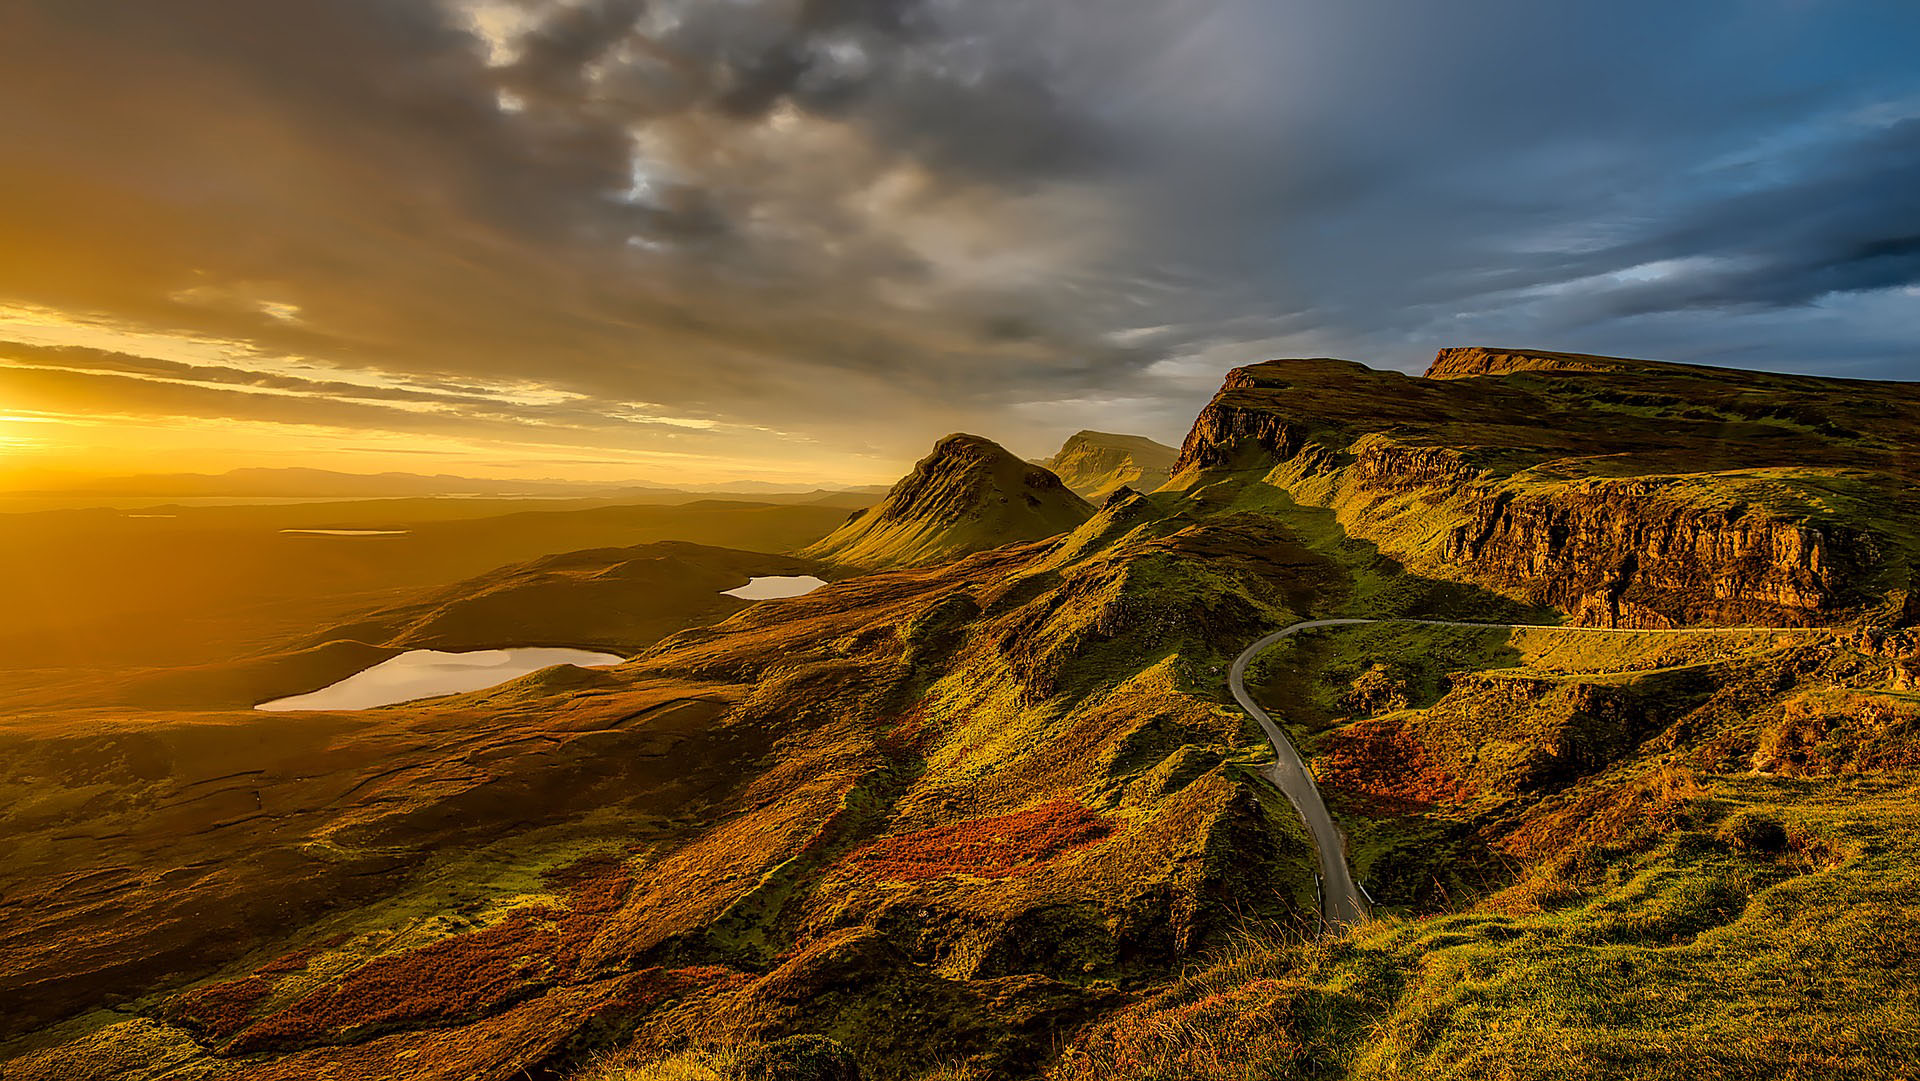 9 of Scotland’s Most Jaw-Dropping Locations.